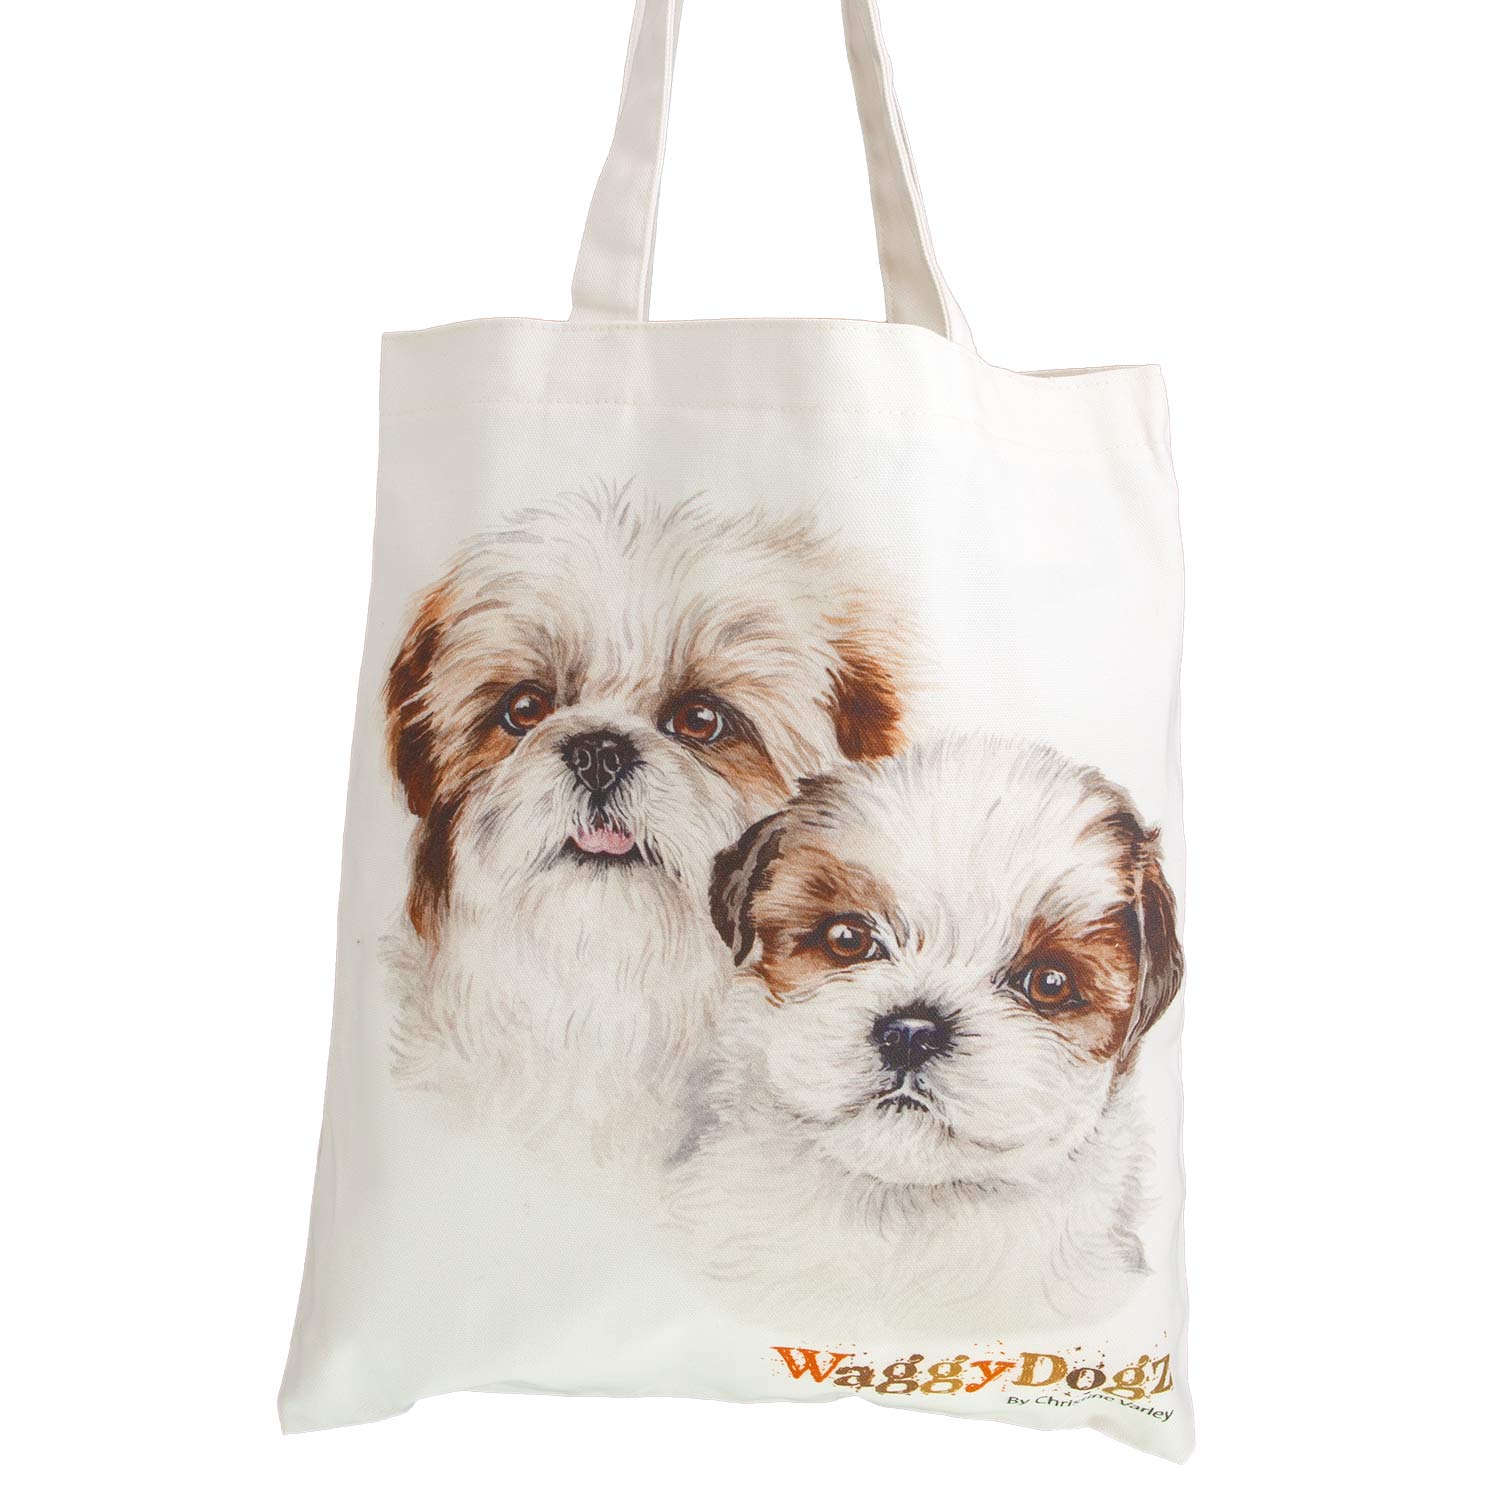 Dog Lover Gifts available at Dog Krazy Gifts. Shih Tzu puppies Bag, part of our Christine Varley collection – available at www.dogkrazygifts.co.uk A Double Sided organic Cotton Tote bag featuring a painting of a pair of Shih Tzu Dogs by Christine Varley, made and printed in Great Britain